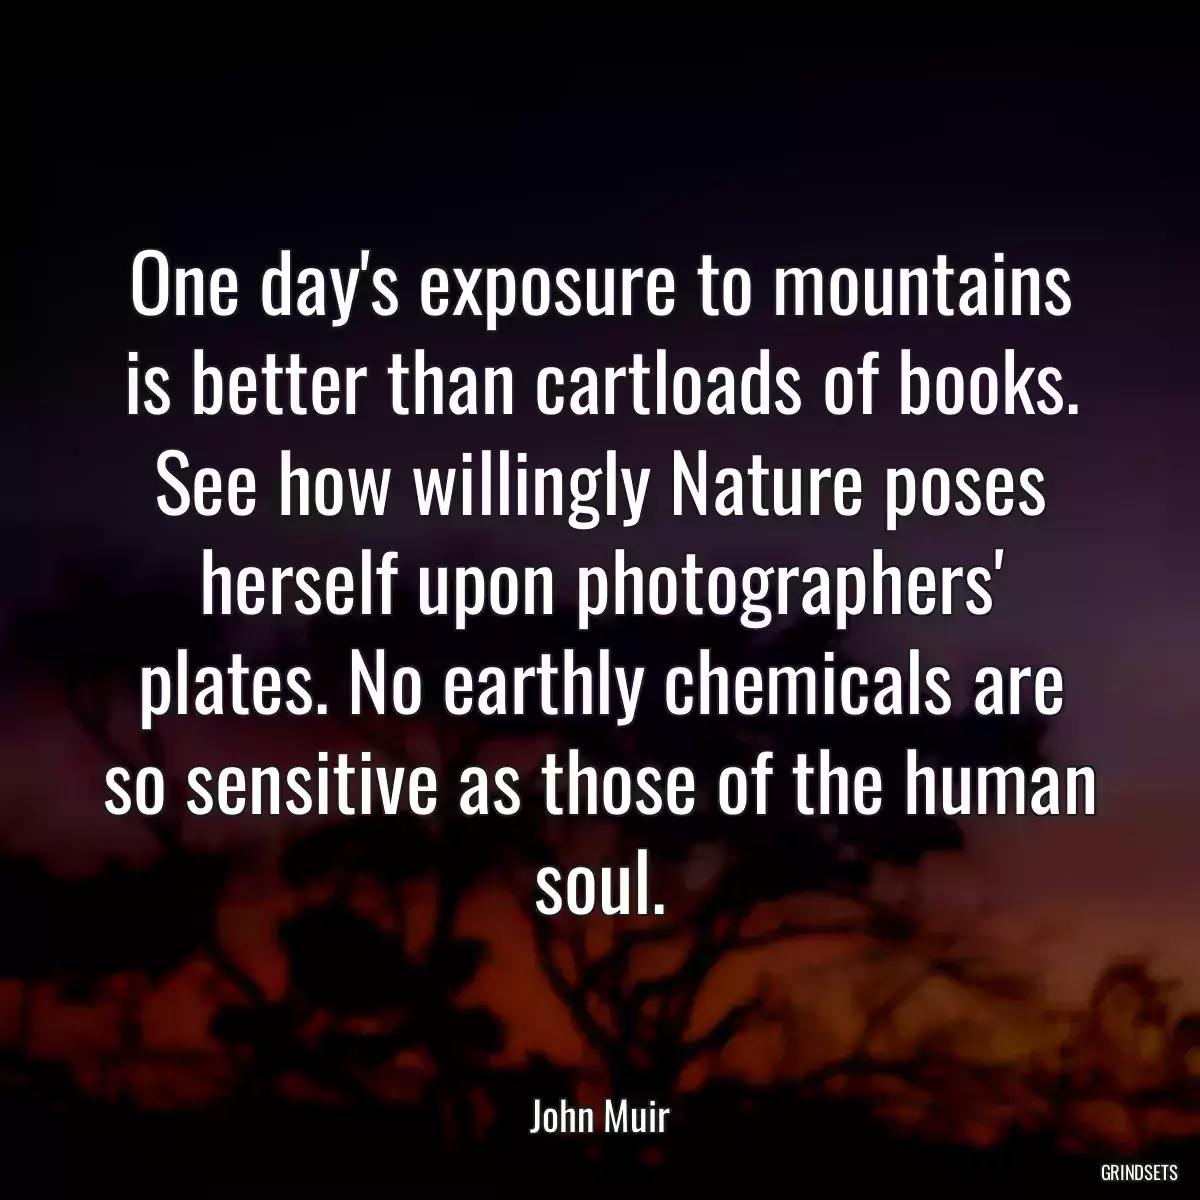 One day\'s exposure to mountains is better than cartloads of books. See how willingly Nature poses herself upon photographers\' plates. No earthly chemicals are so sensitive as those of the human soul.